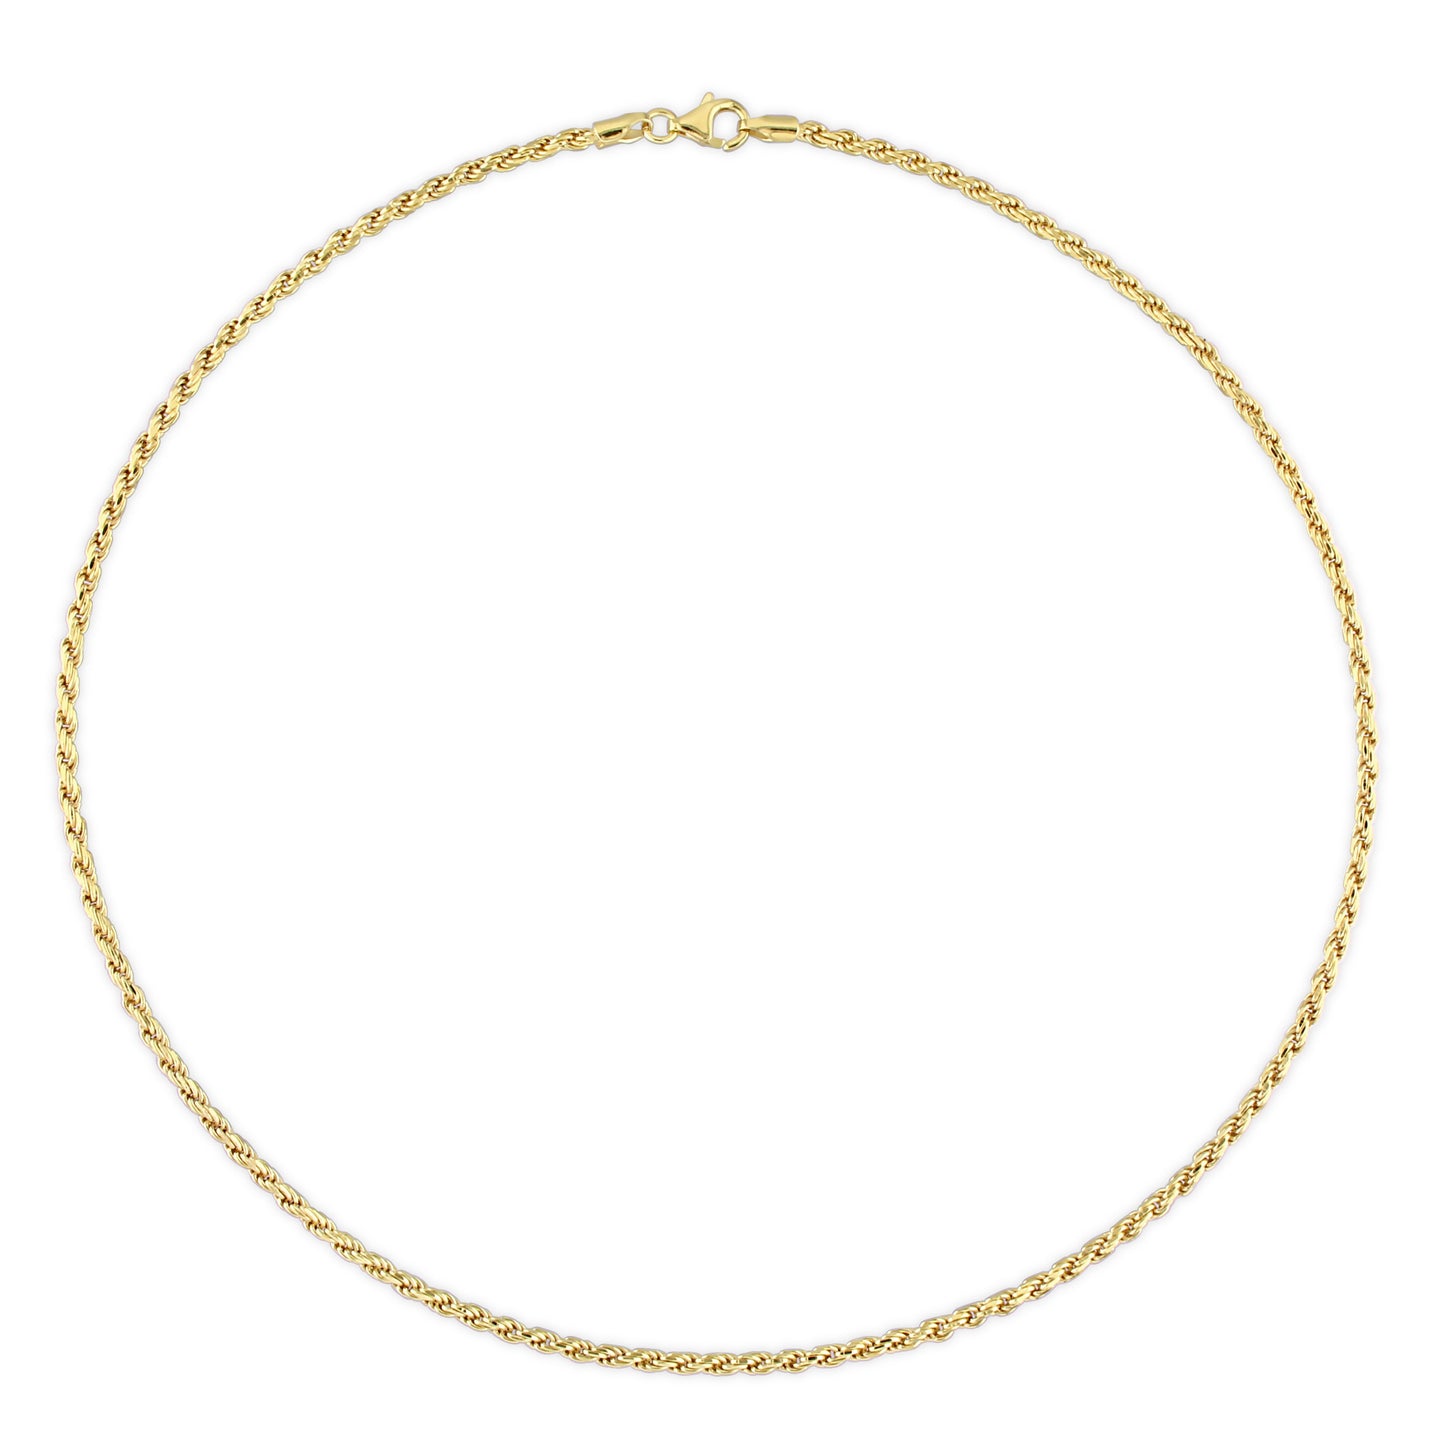 18k Yellow Gold Plated Rope Chain in 2.2mm